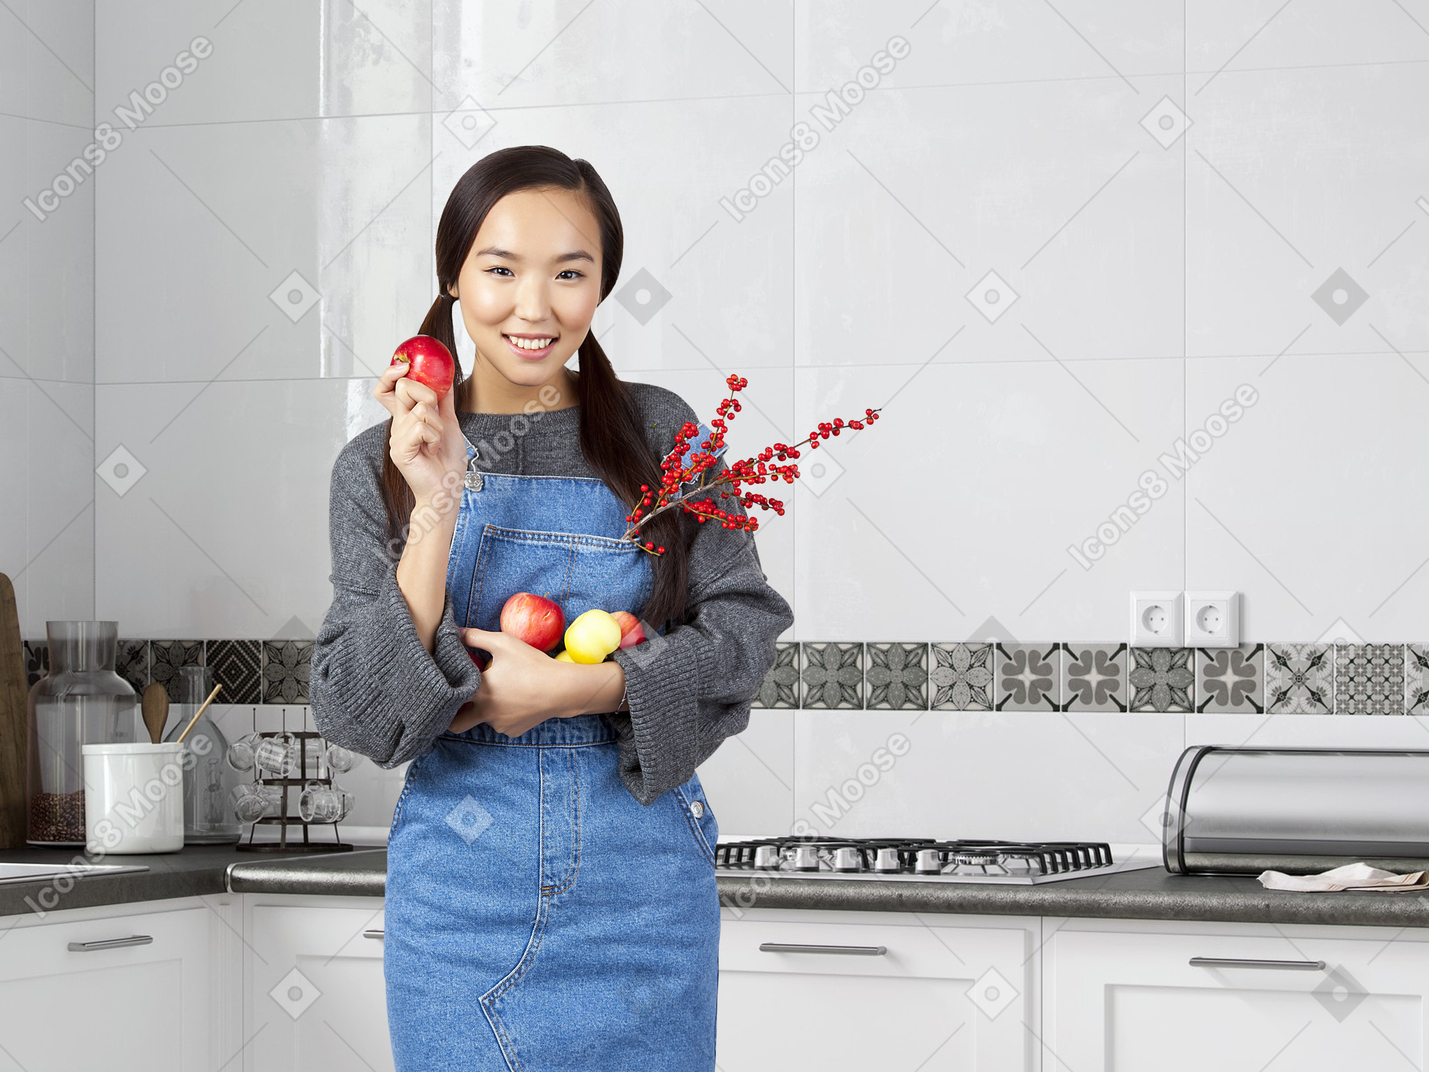 Happy young man eating apple in the kitchen